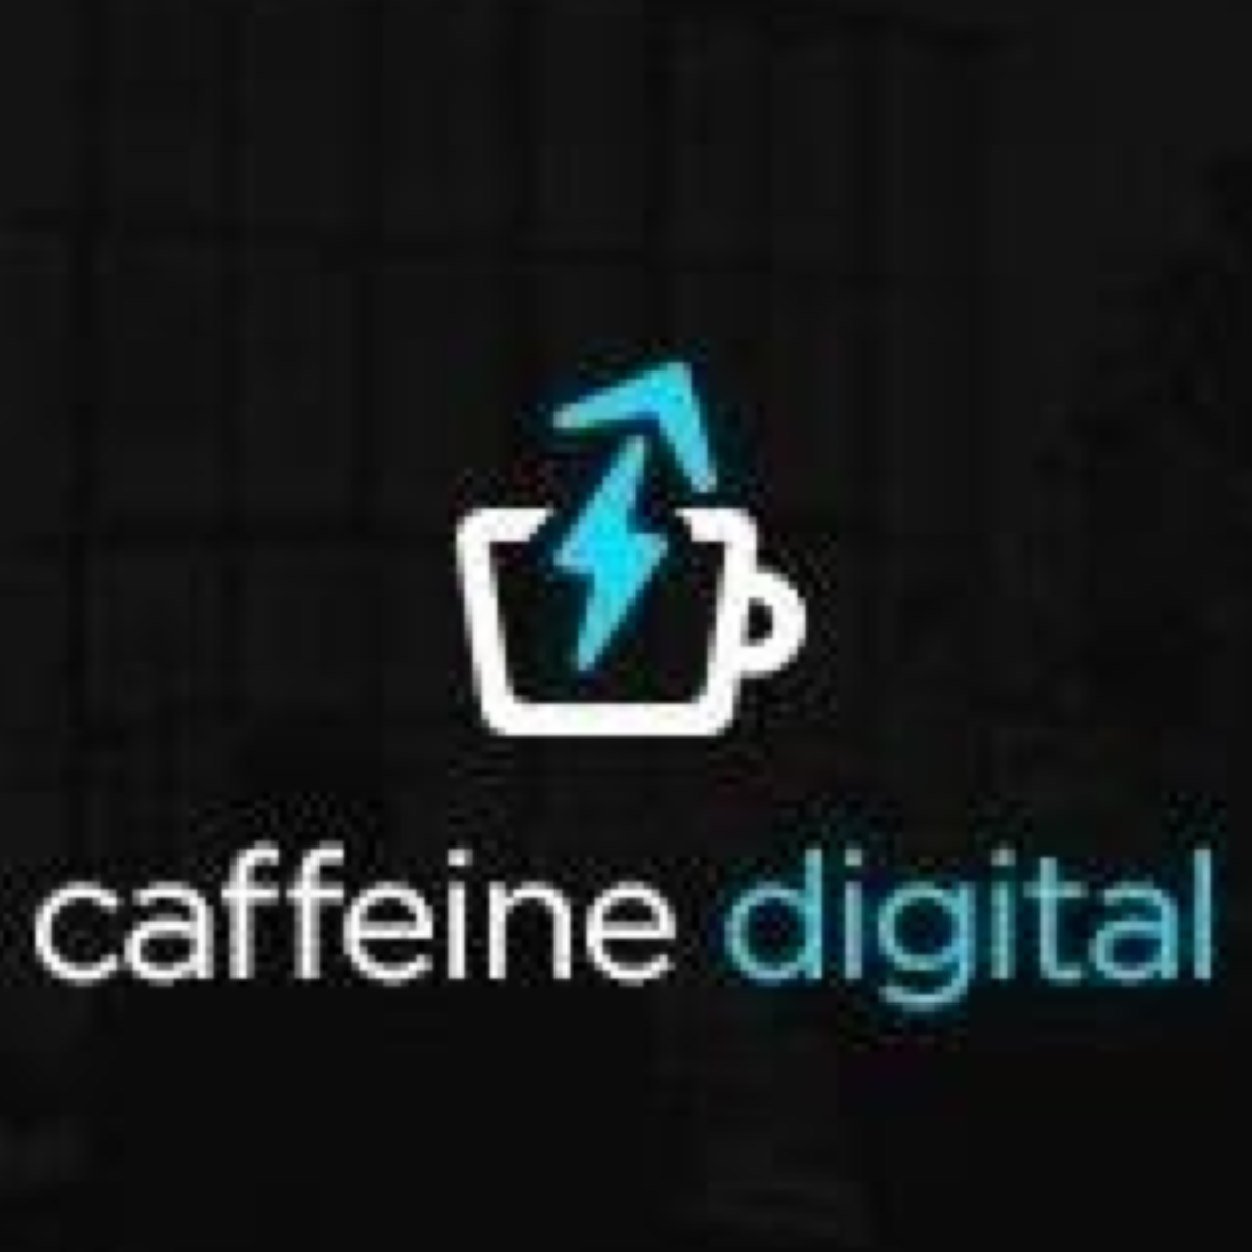 Social Marketing Agency. Welcoming new Publishers. We have been in business since May 2014 and have never missed a single weekly payment! kik:@CaffeineDigital